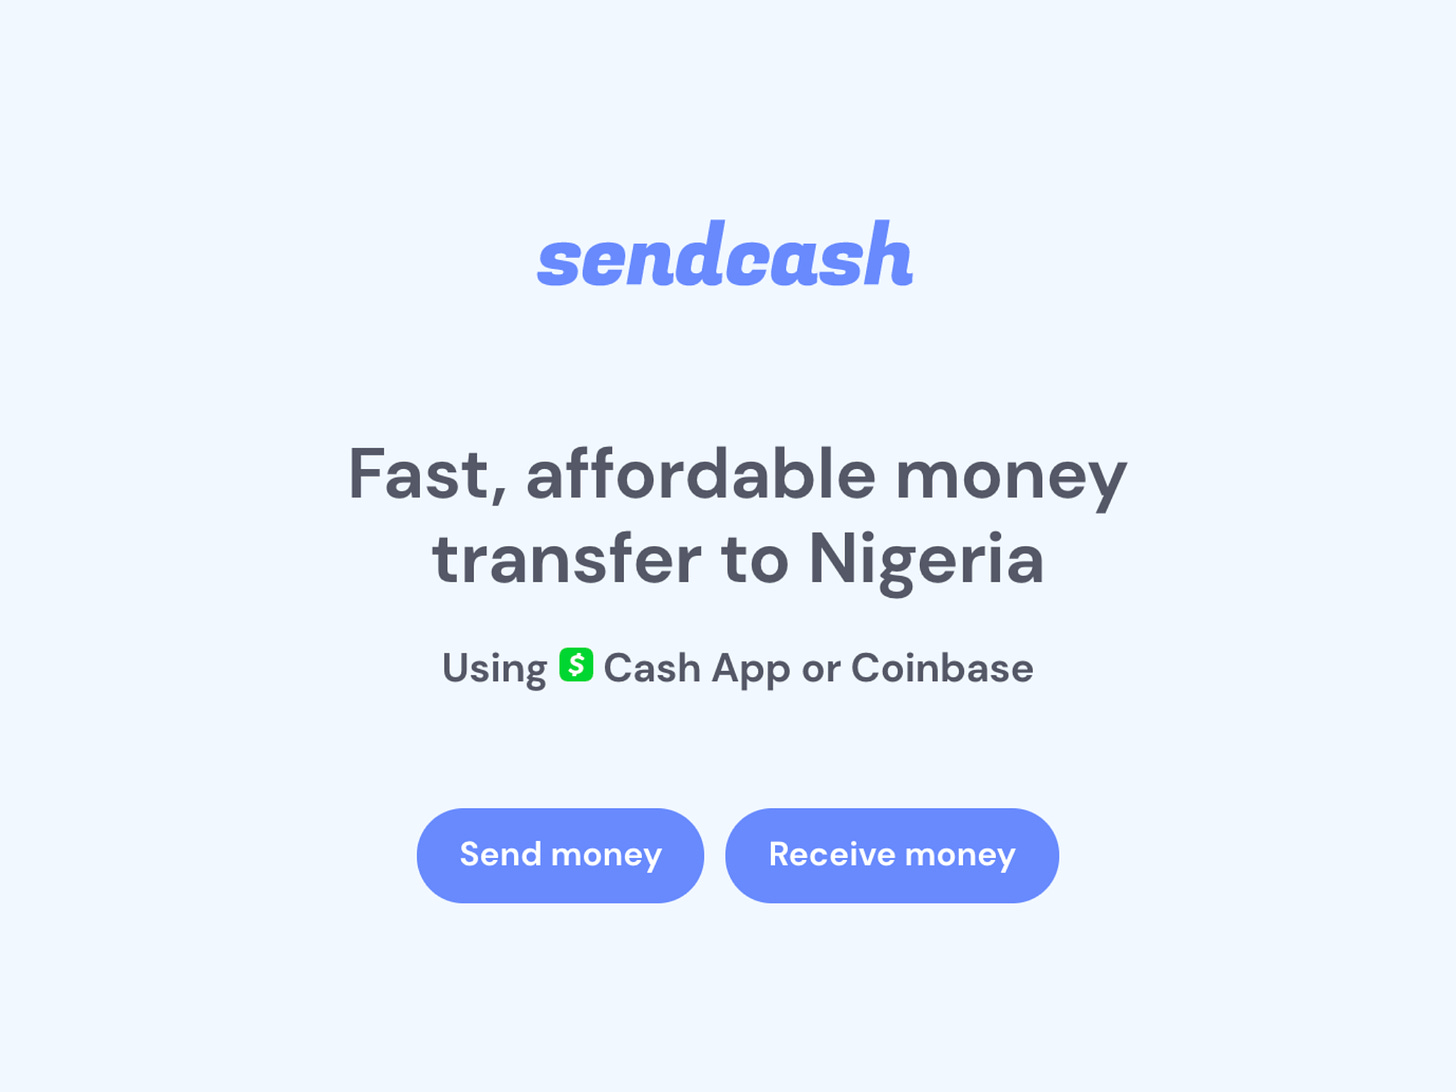 Fast, affordable money transfers to Nigeria